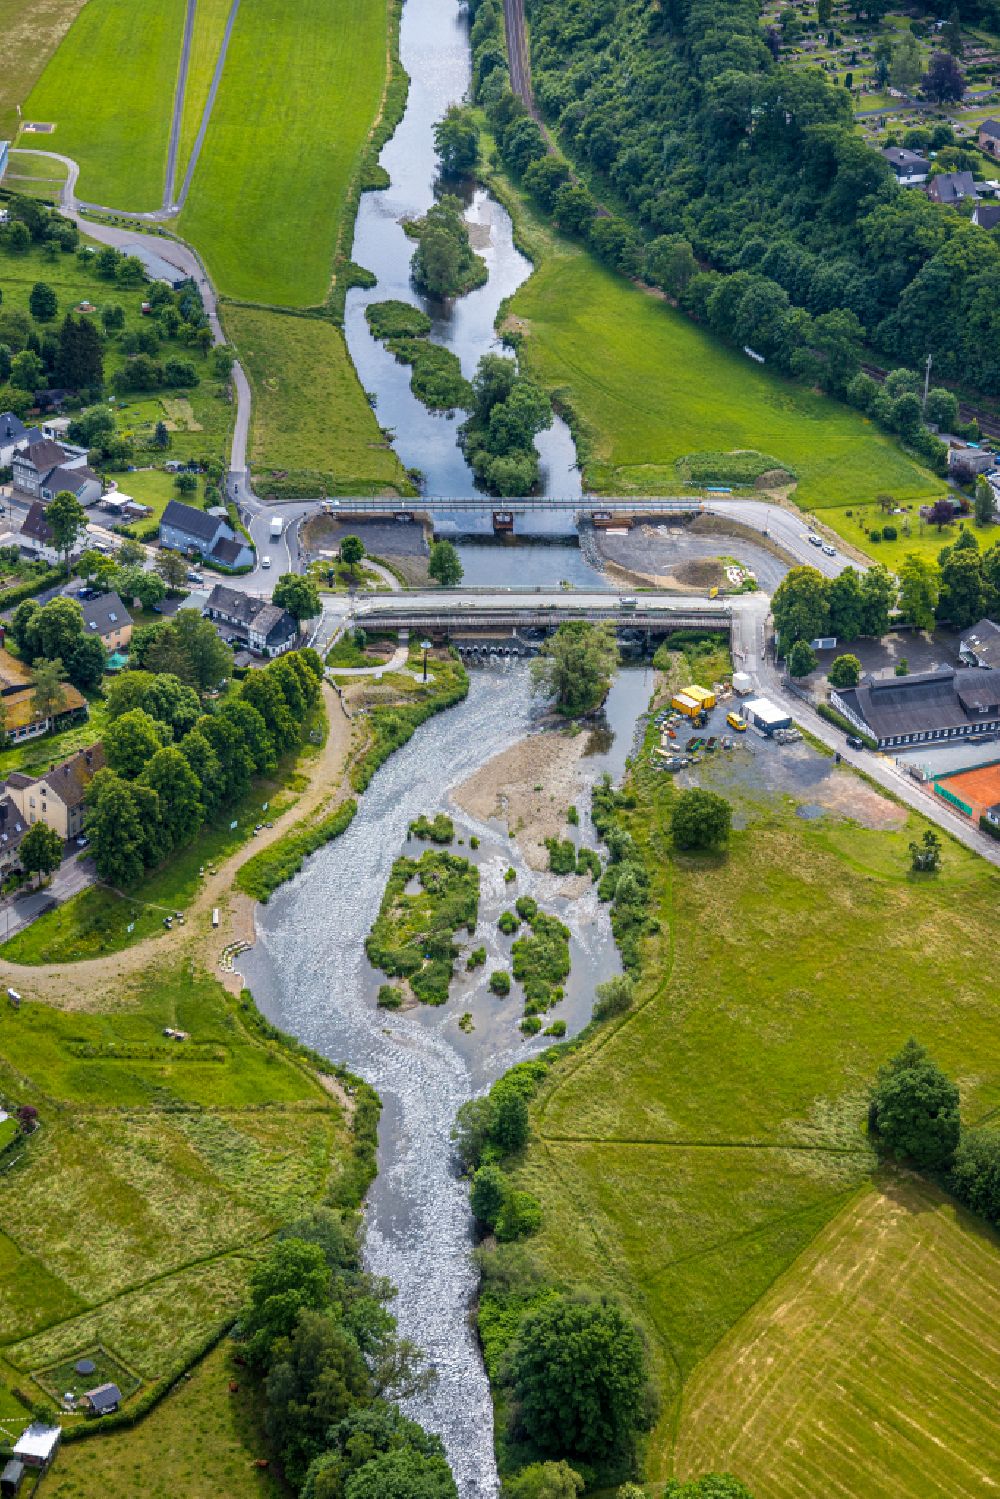 Oeventrop from above - New construction of the bridge structure Dinscheder Bruecke over the Ruhr river in Oeventrop at Sauerland in the state North Rhine-Westphalia, Germany